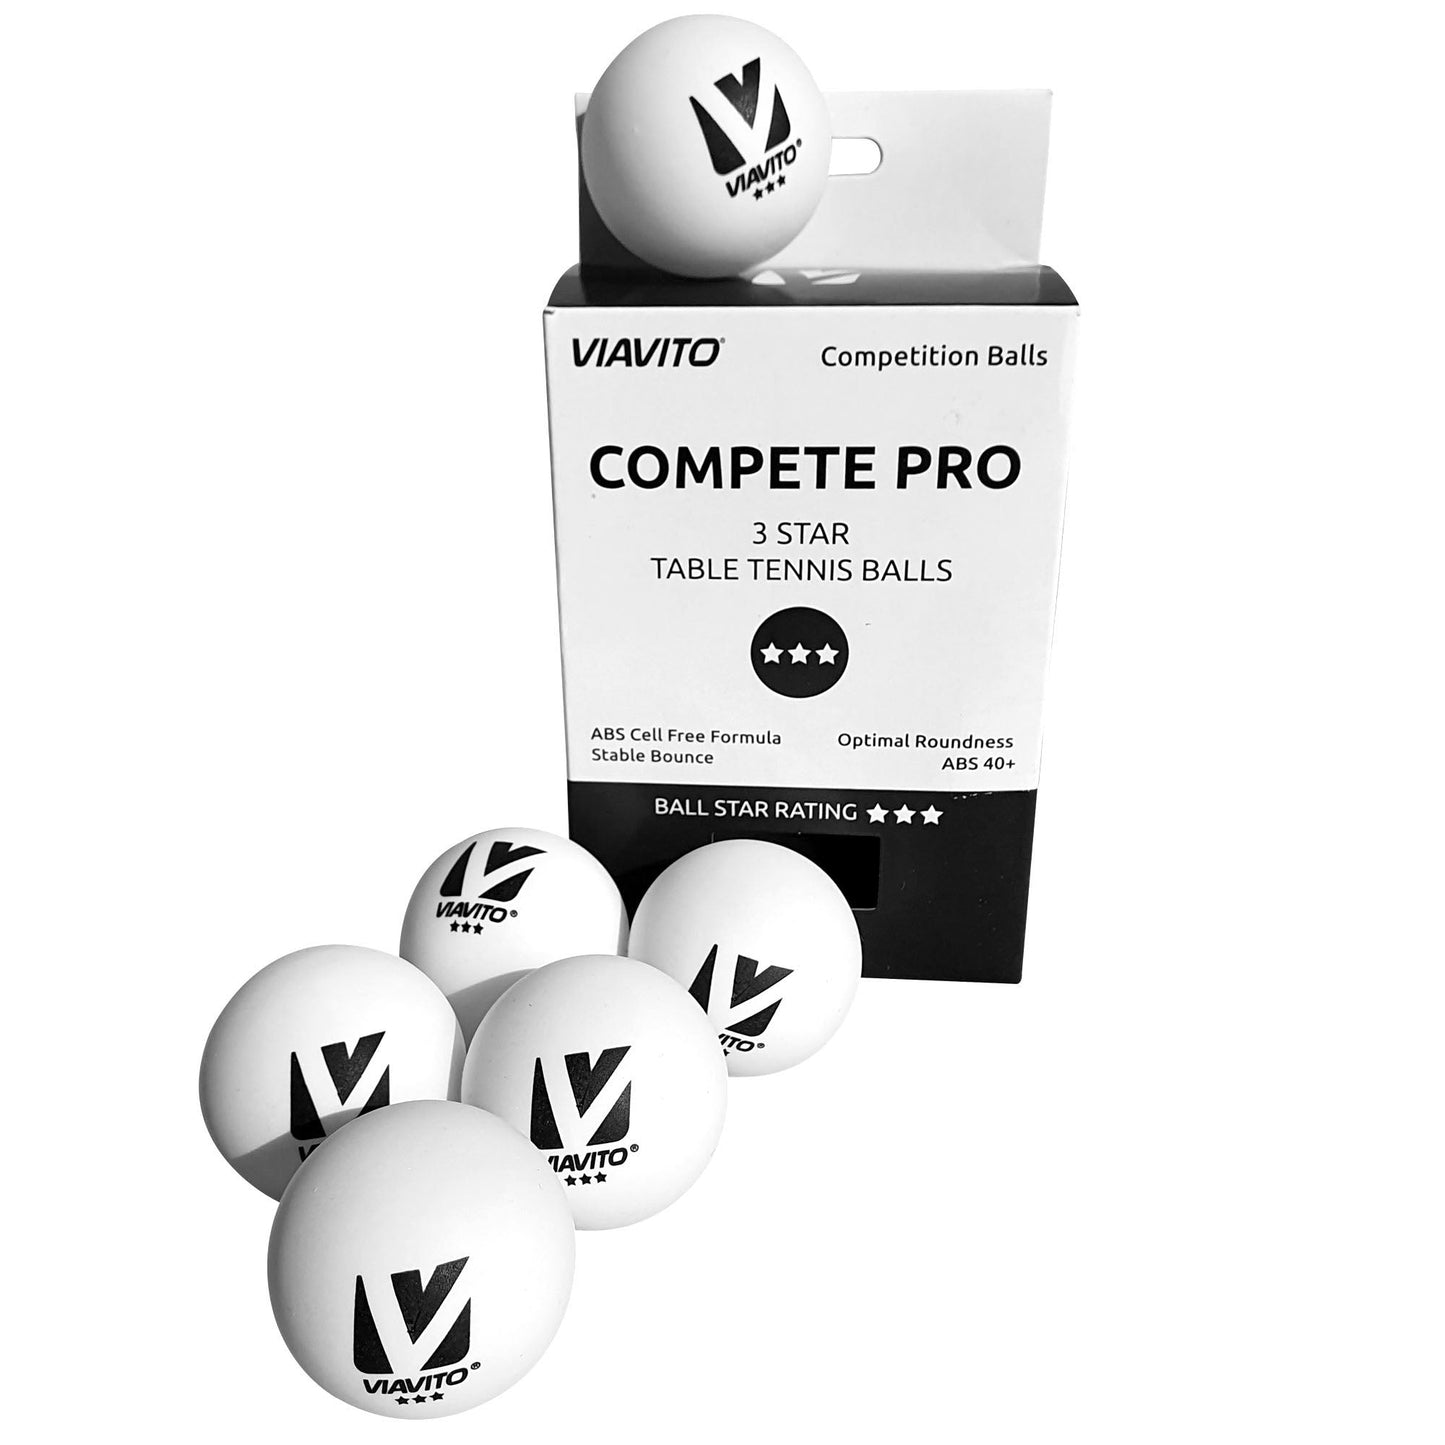 |Viavito Compete Pro 3 Star Table Tennis Balls - Pack of 6 - New - Balls|